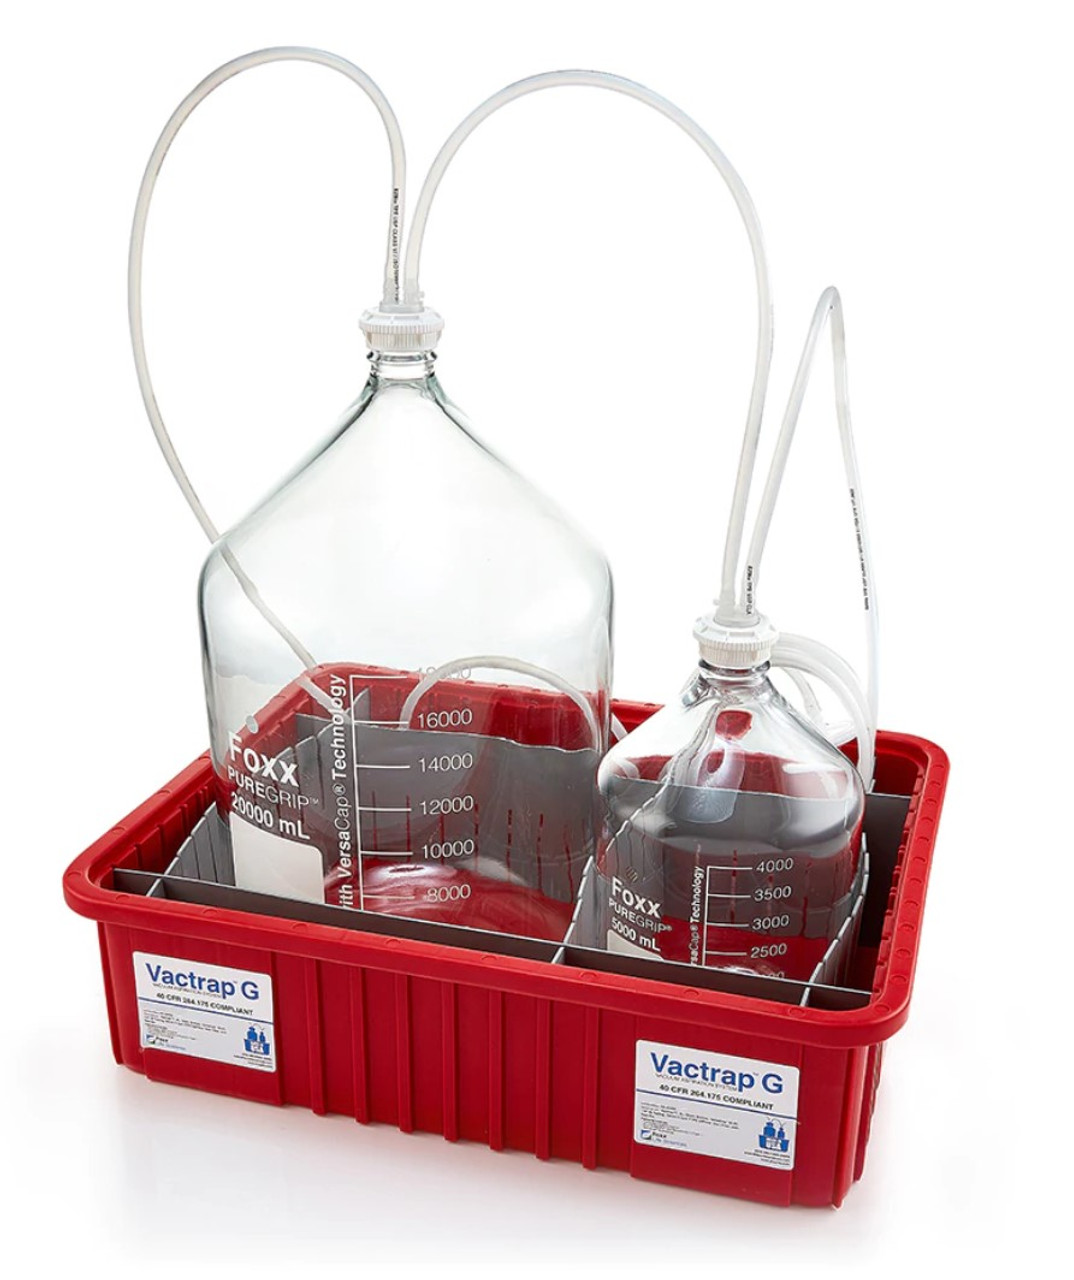 Vactrap G Vacuum Trap System With One 20 Liter and One 5 Liter Glass  Bottles, Red Bin, GL45 Caps and 1/4